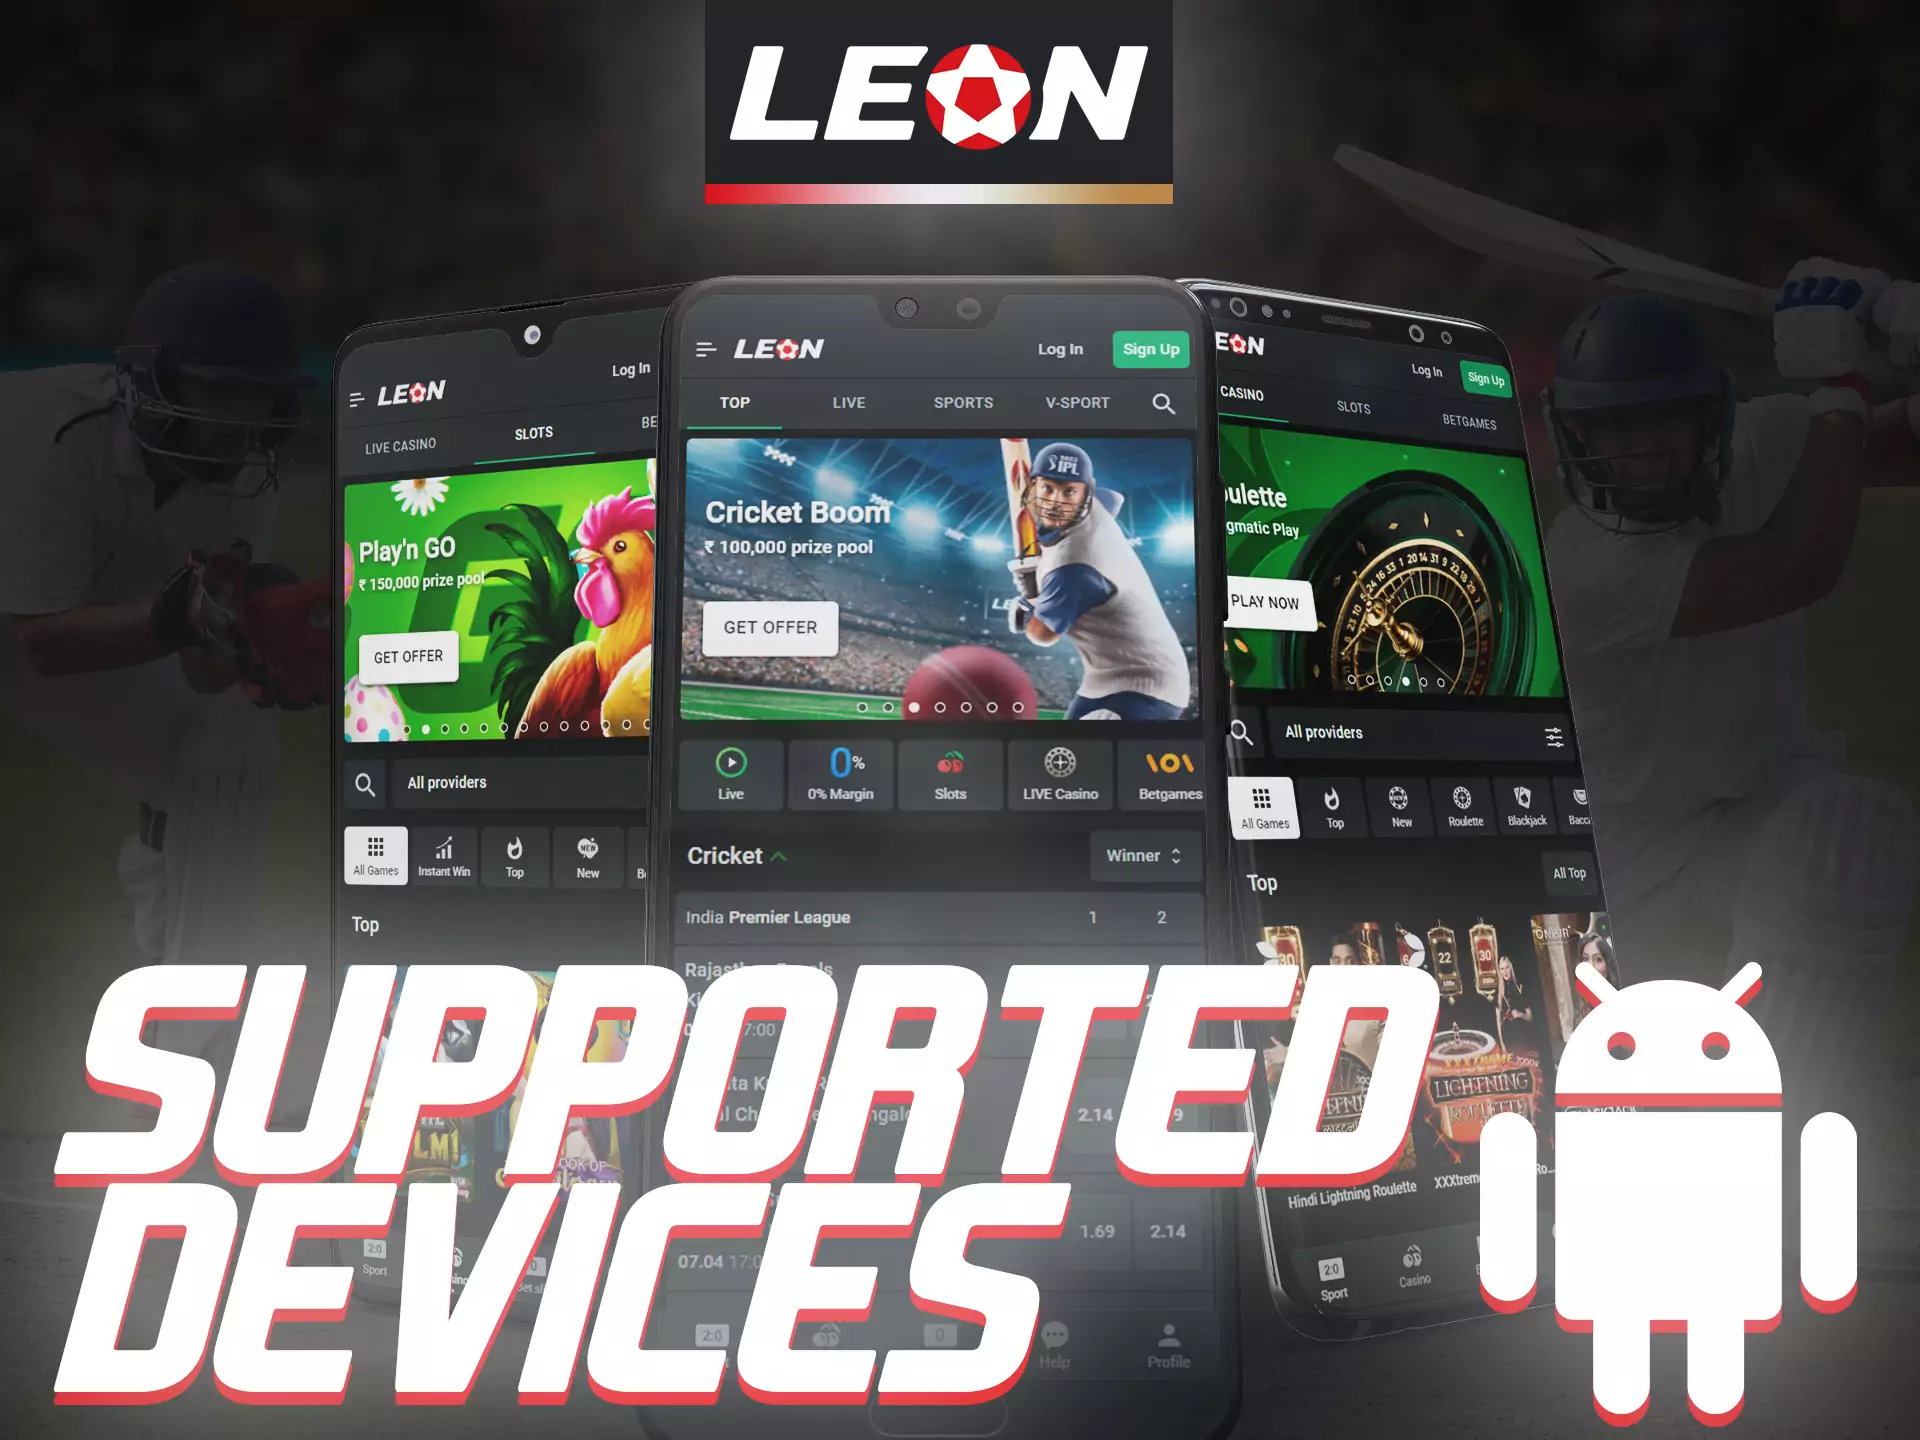 Leonbet app is supported on various models and versions of Android devices.